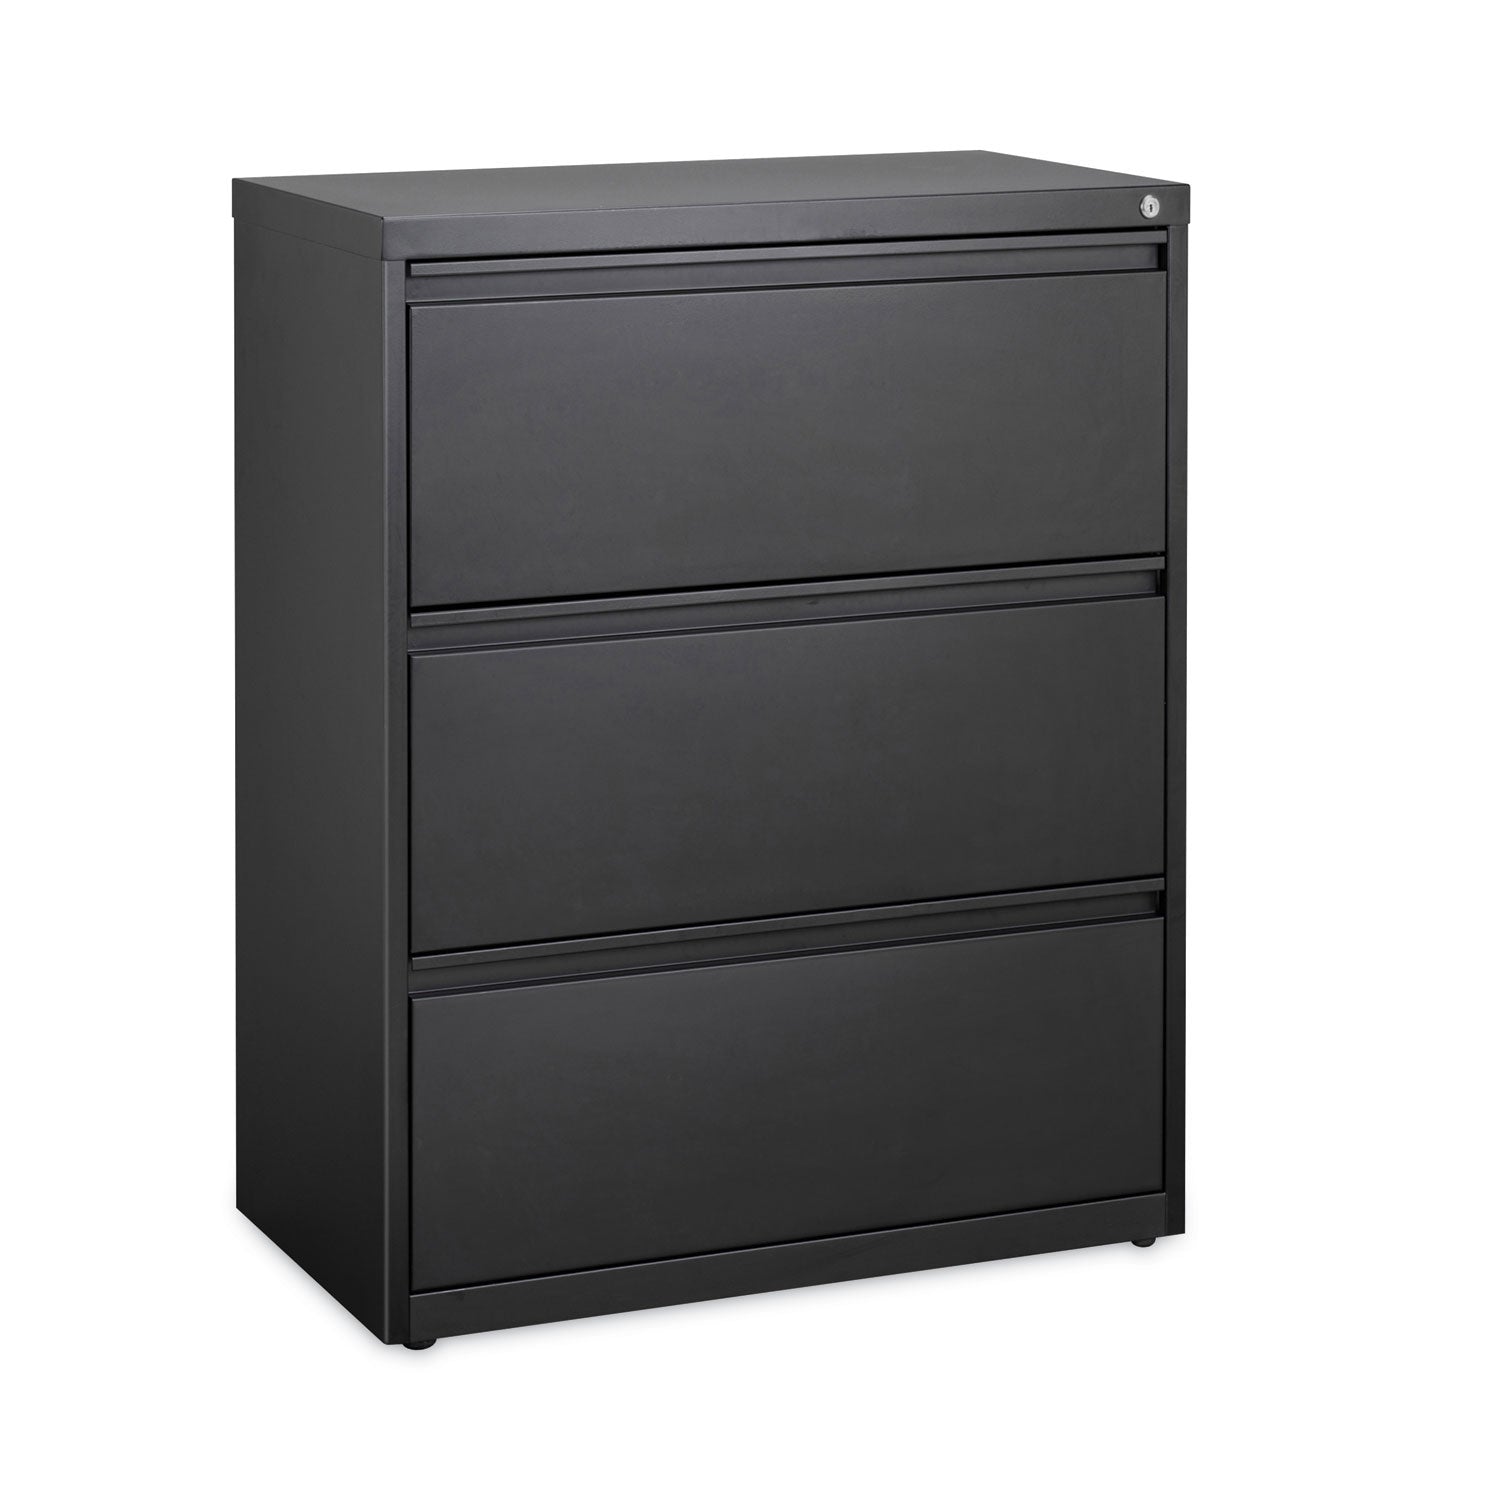 lateral-file-cabinet-3-letter-legal-a4-size-file-drawers-black-30-x-1862-x-4025_hid14974 - 2